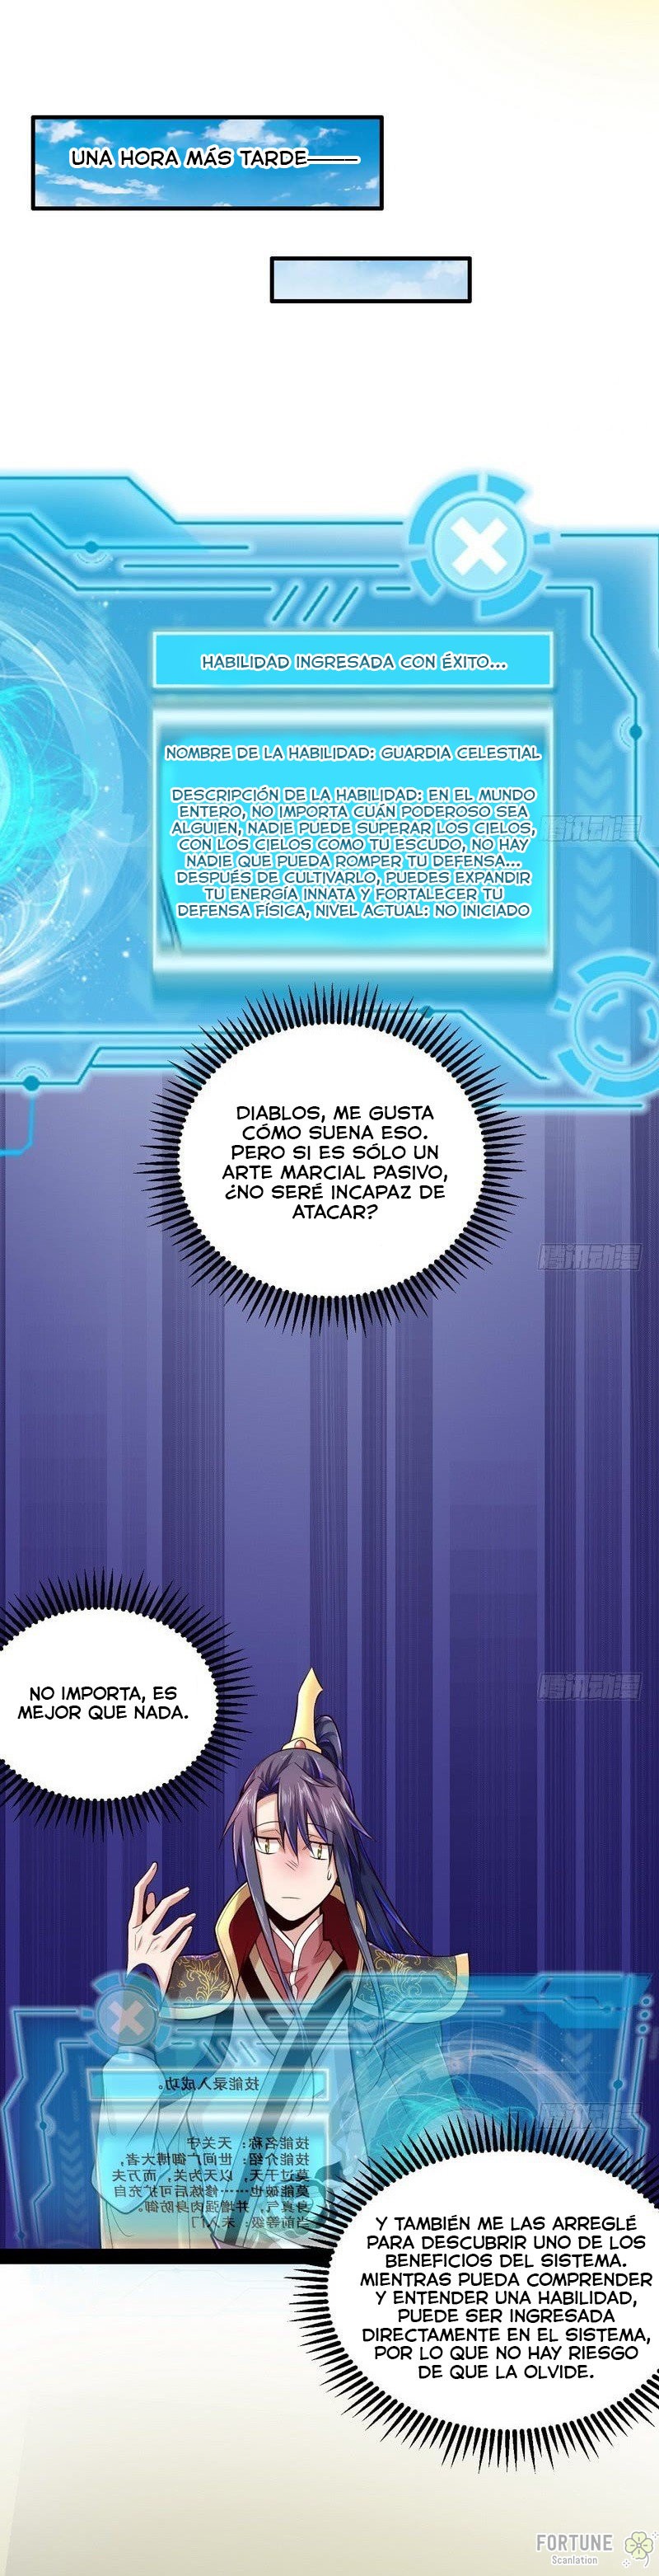 Manga Soy un dios maligno Chapter 11 image number 19